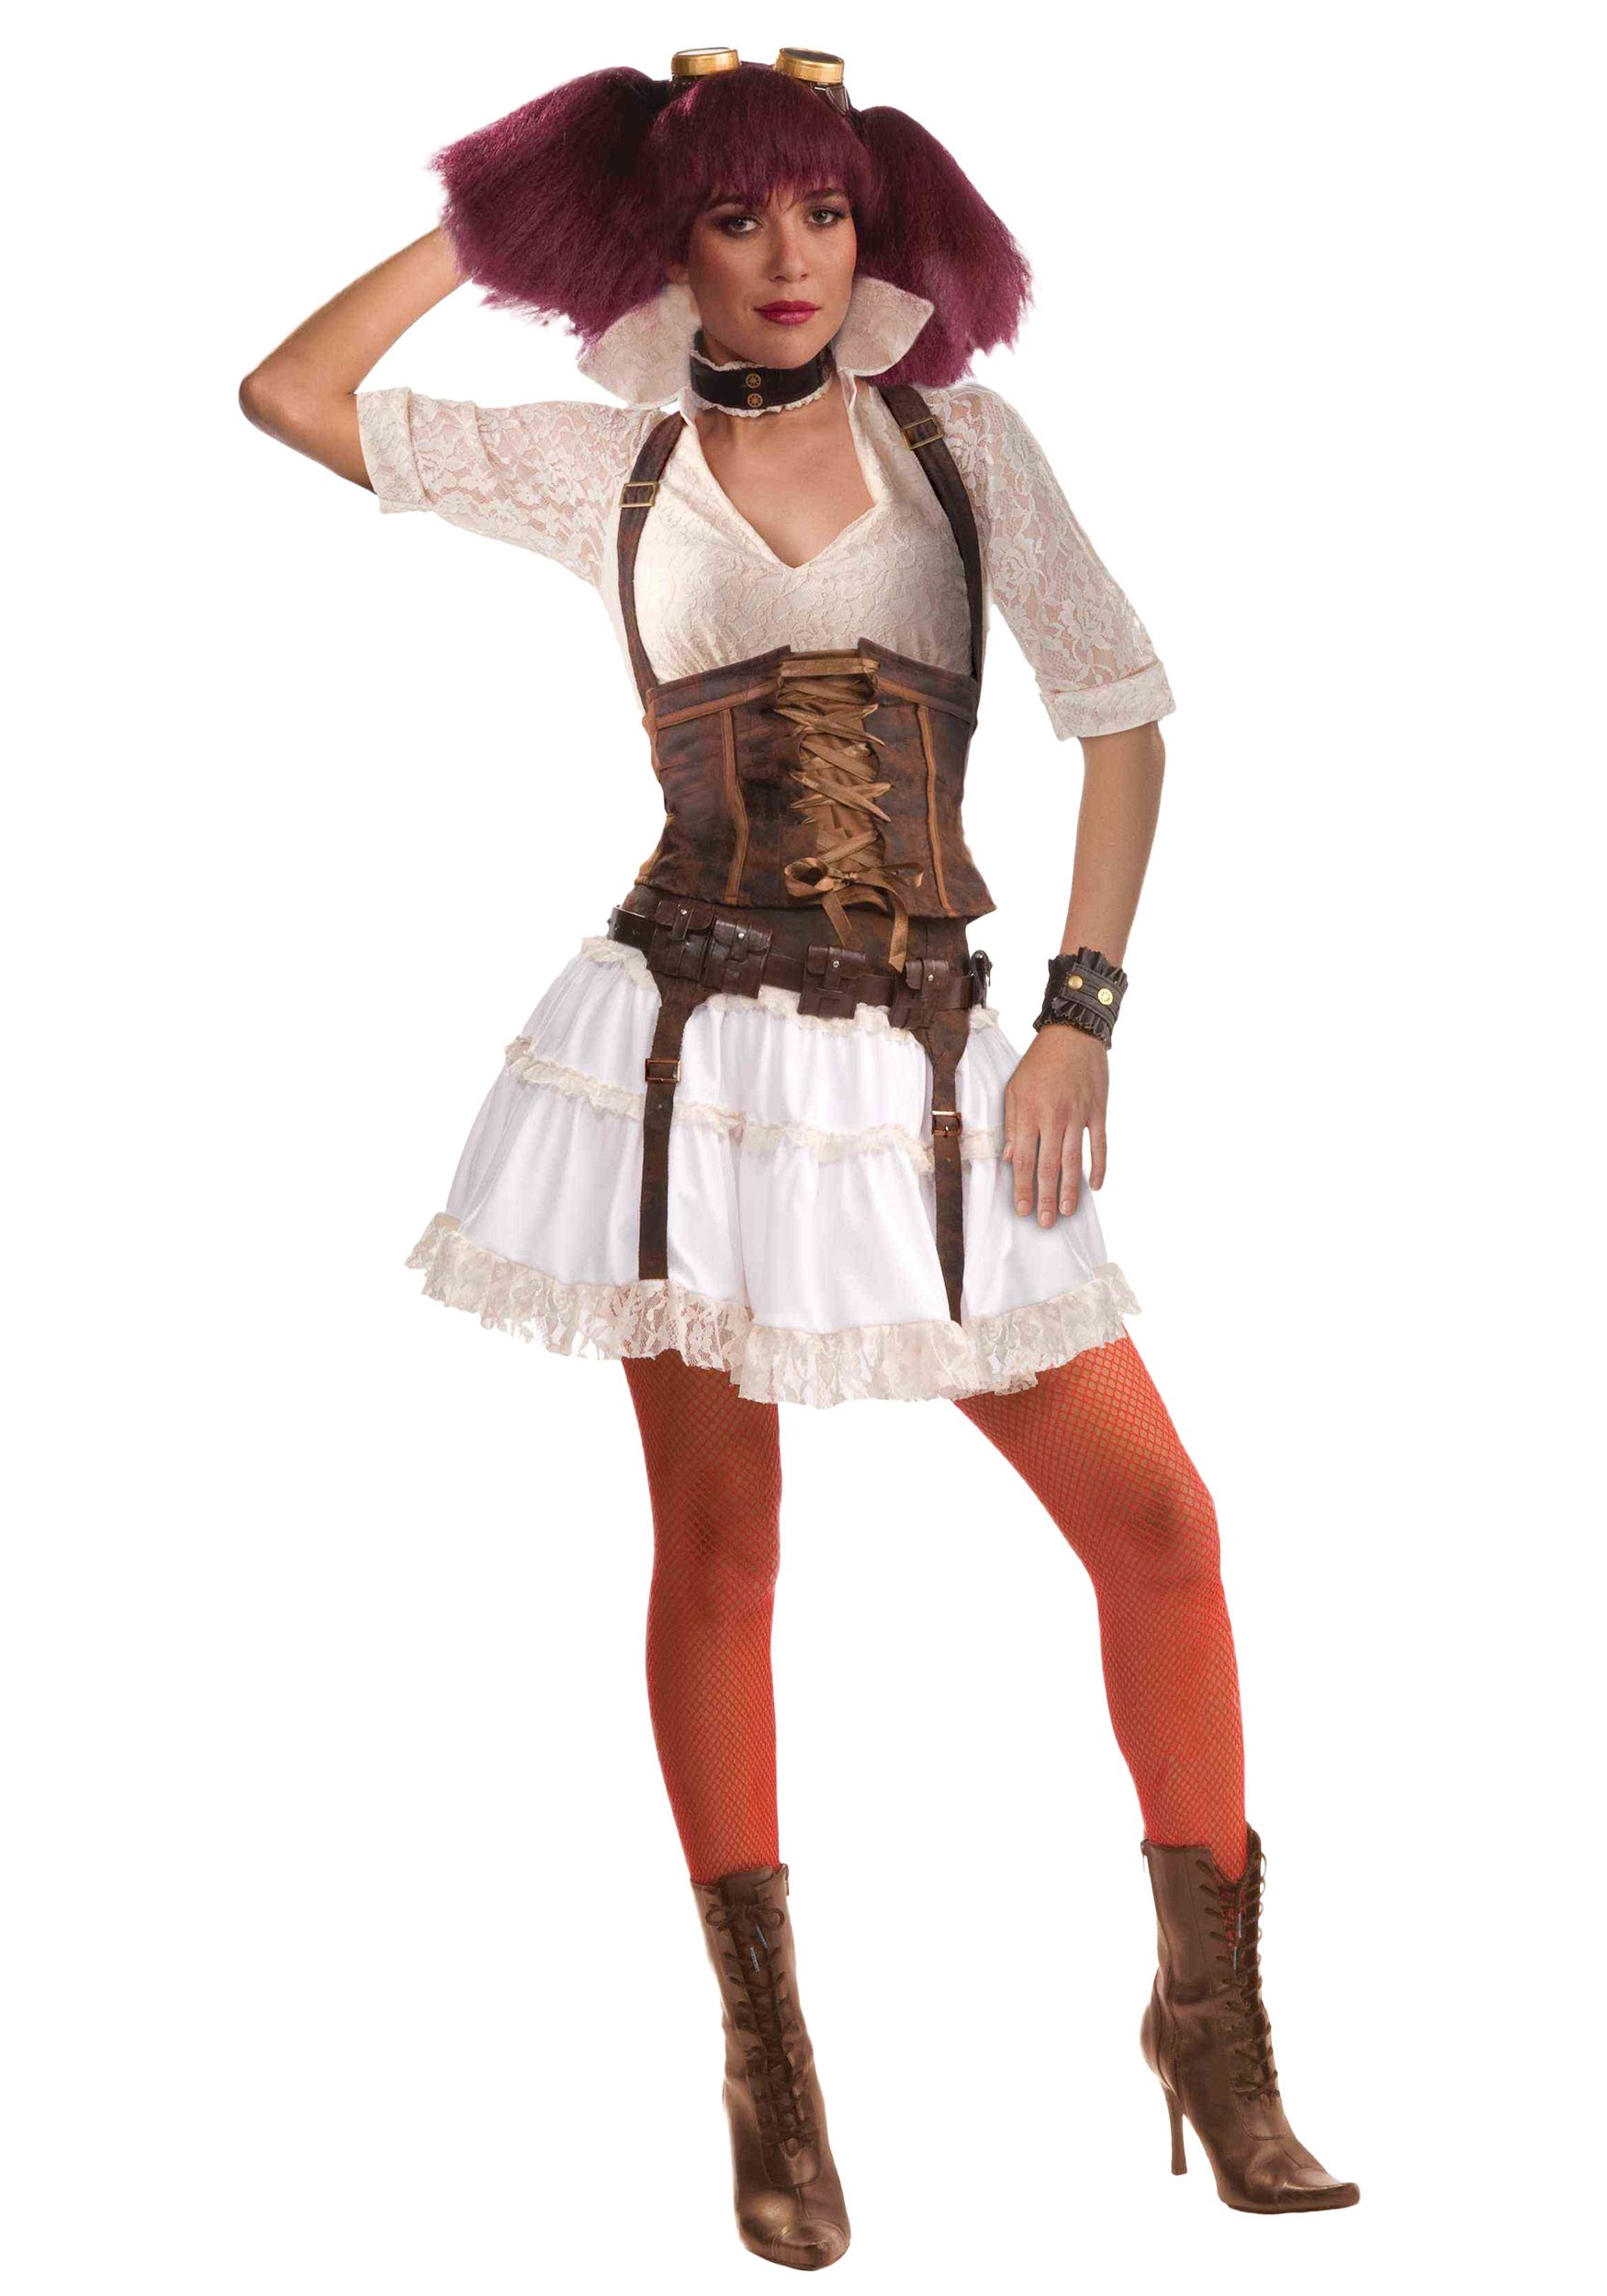 https://images.halloweencostumes.ca/products/4054/1-1/womens-steampunk-costume.jpg